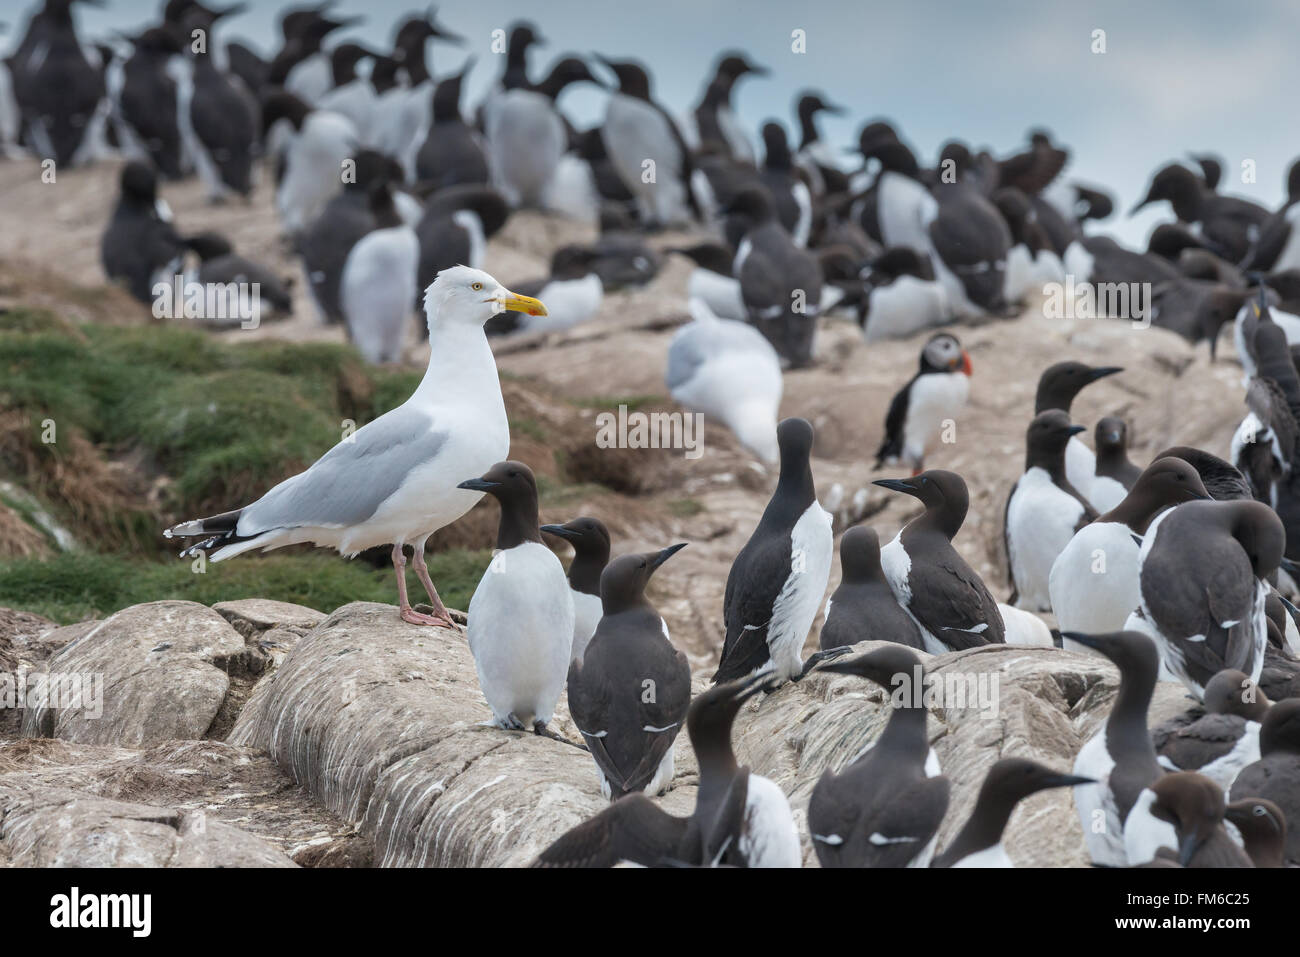 A herring gull {Larus argentatus} standing amongst a colony of guillemots {Uria aalge}, with a solitary puffin Stock Photo